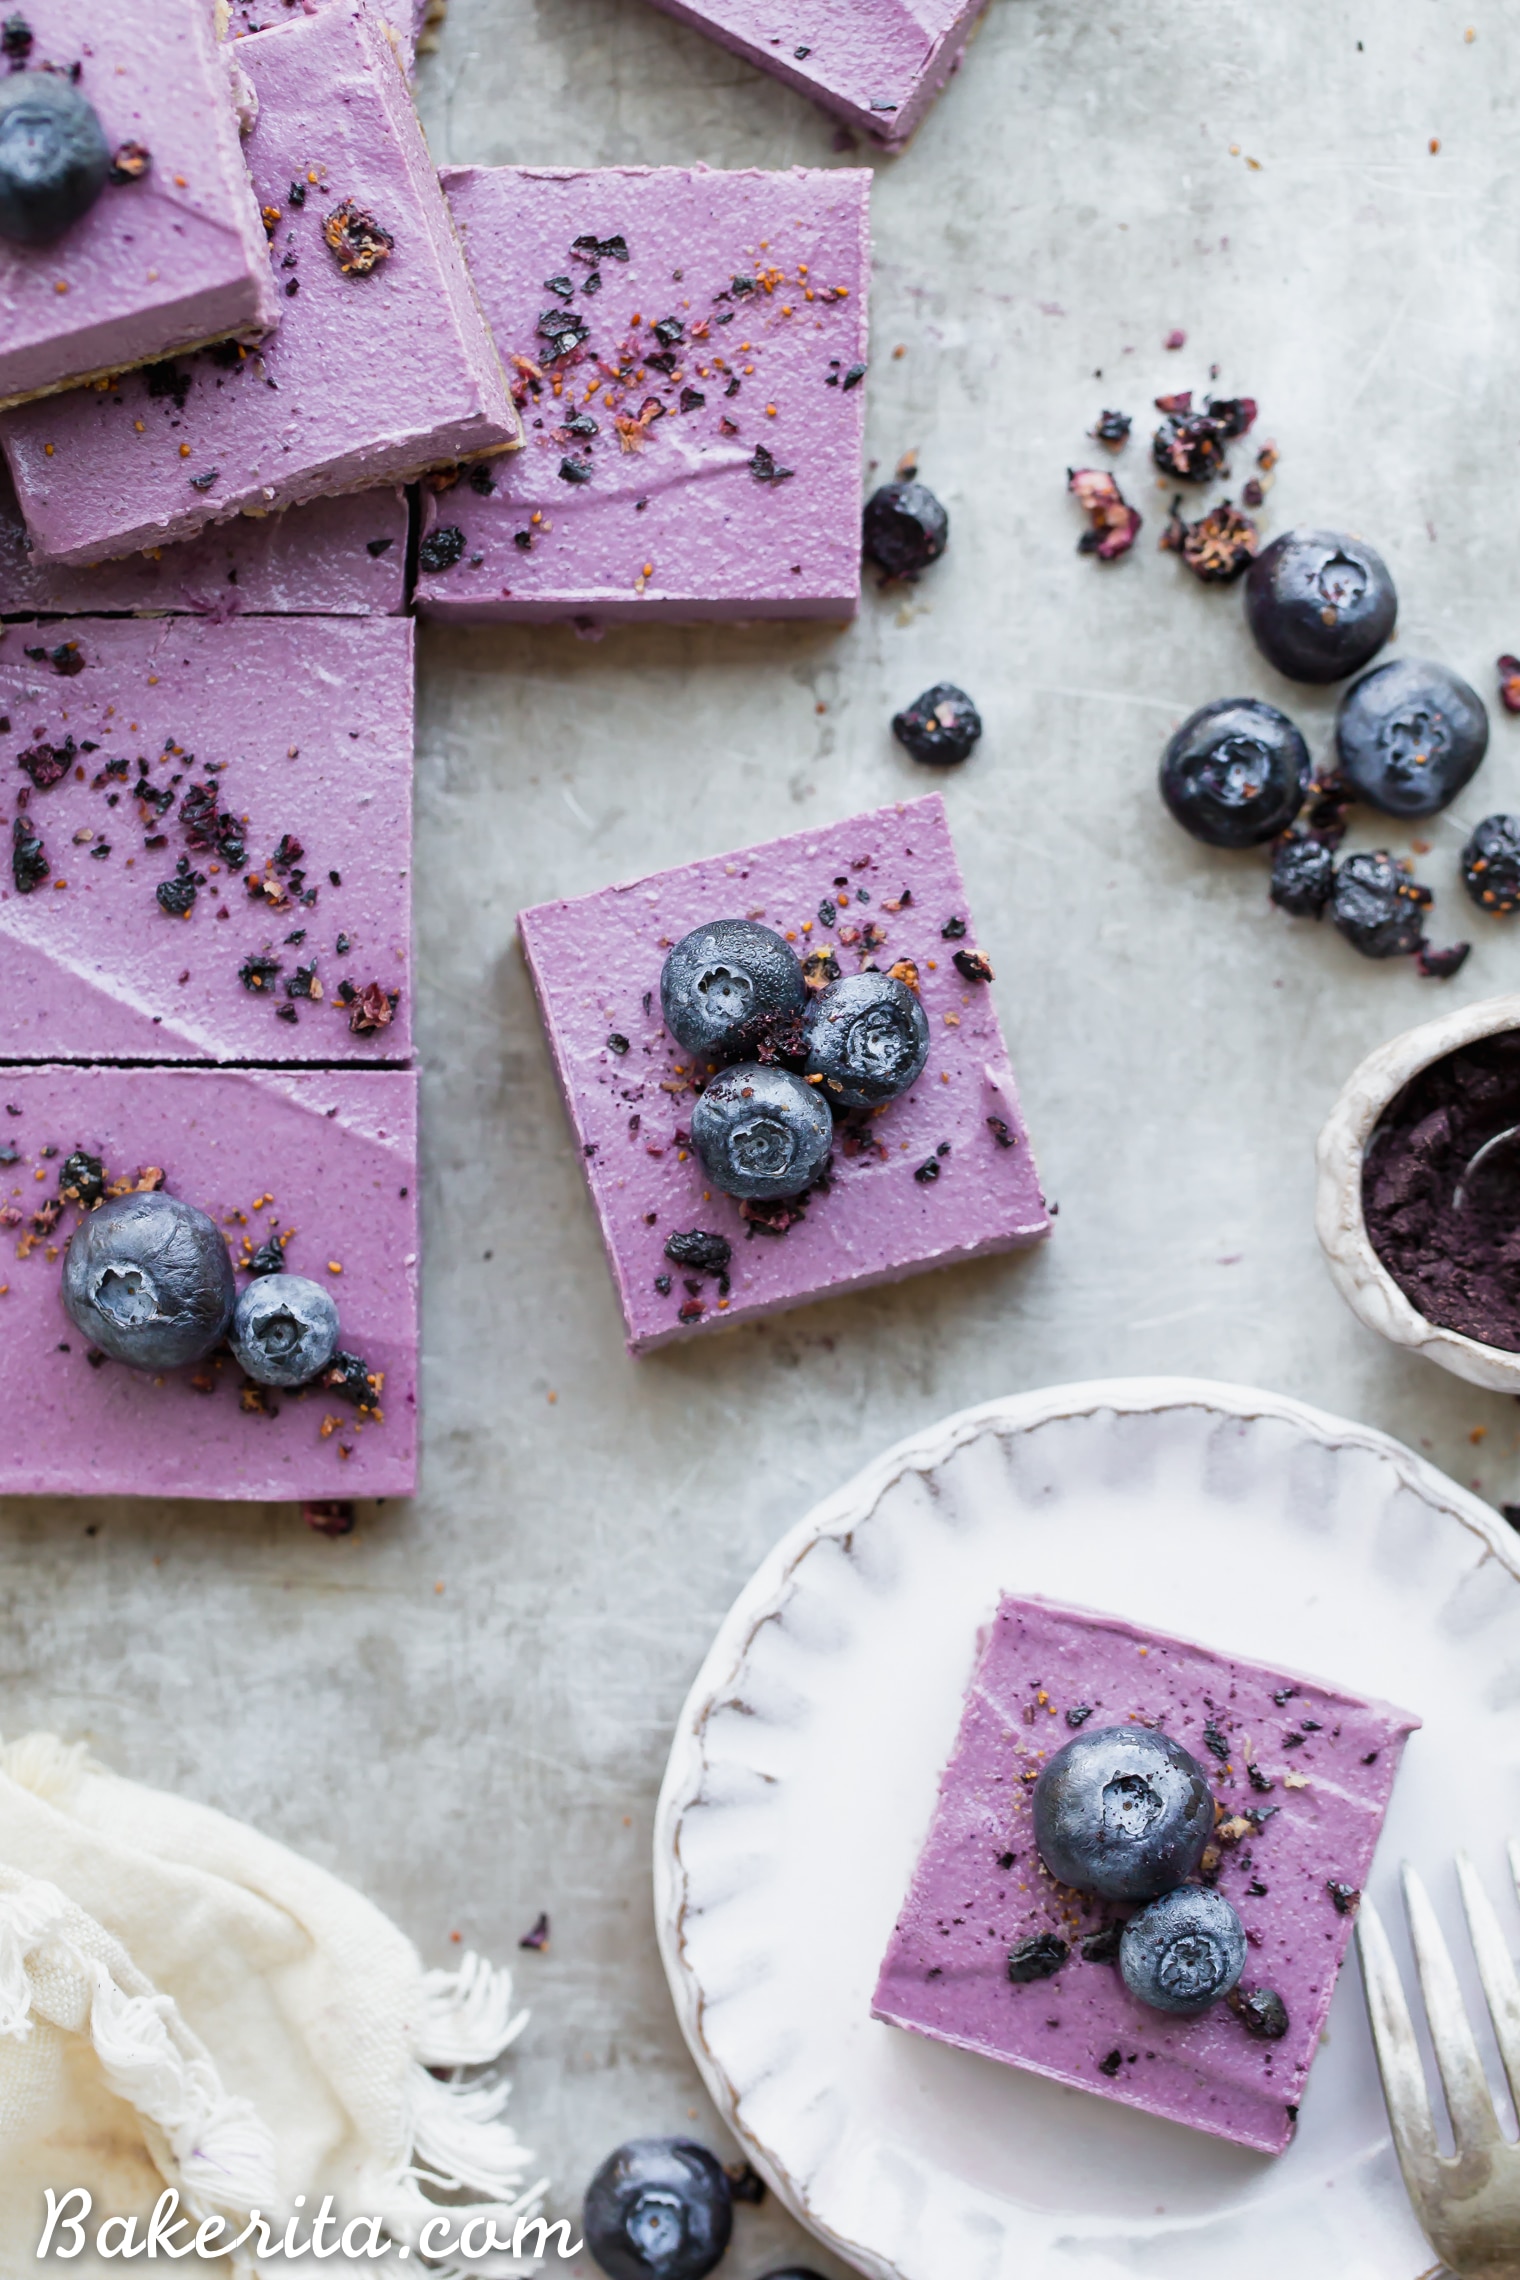 These creamy No-Bake Acai Maqui Berry Bars are full of antioxidants from acai + maqui berry powder - it's a punch of superfood power packed into a healthy and delicious dessert bar! These gluten-free, paleo and vegan bars are so refreshing - no baking necessary.